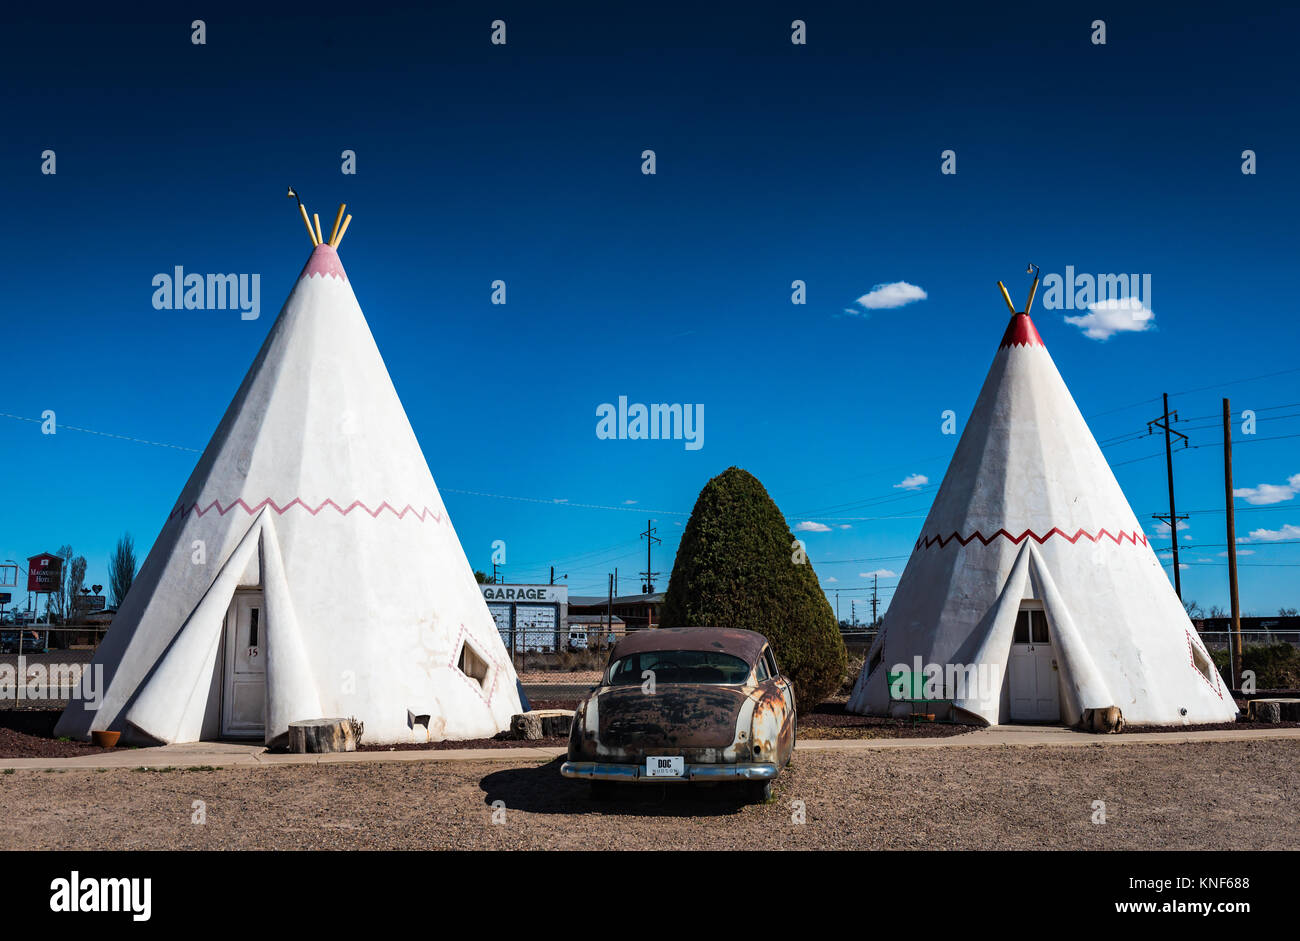 The Wigwam Motels built in the 1930s and 1940s are classic Route 66 roadside accommodations in Arizona, USA. Stock Photo